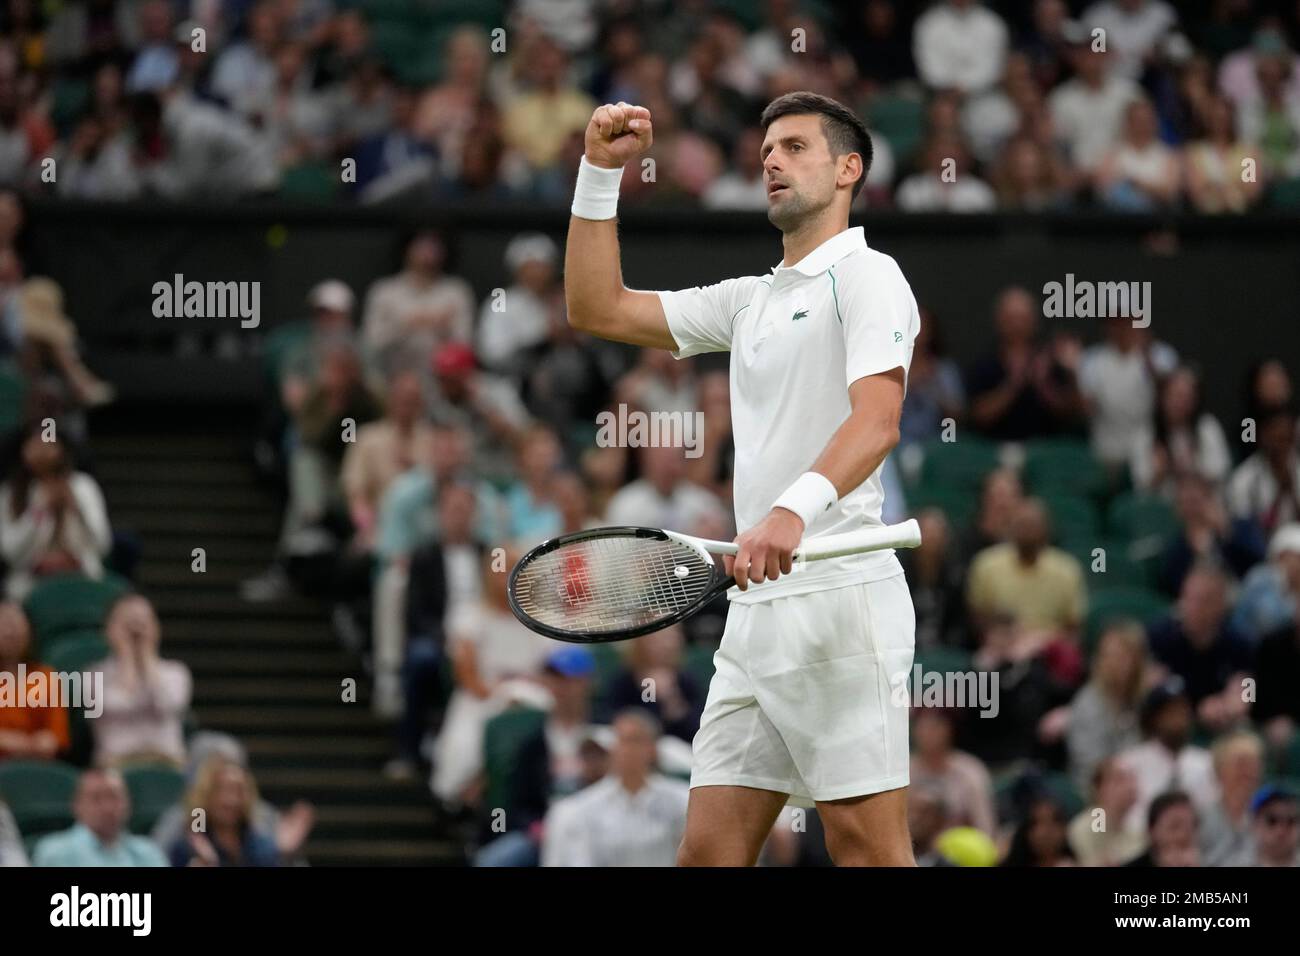 Serbias Novak Djokovic celebrates winning a point against Tim van Rijthoven of the Netherlands during a mens fourth round singles match on day seven of the Wimbledon tennis championships in London, Sunday,